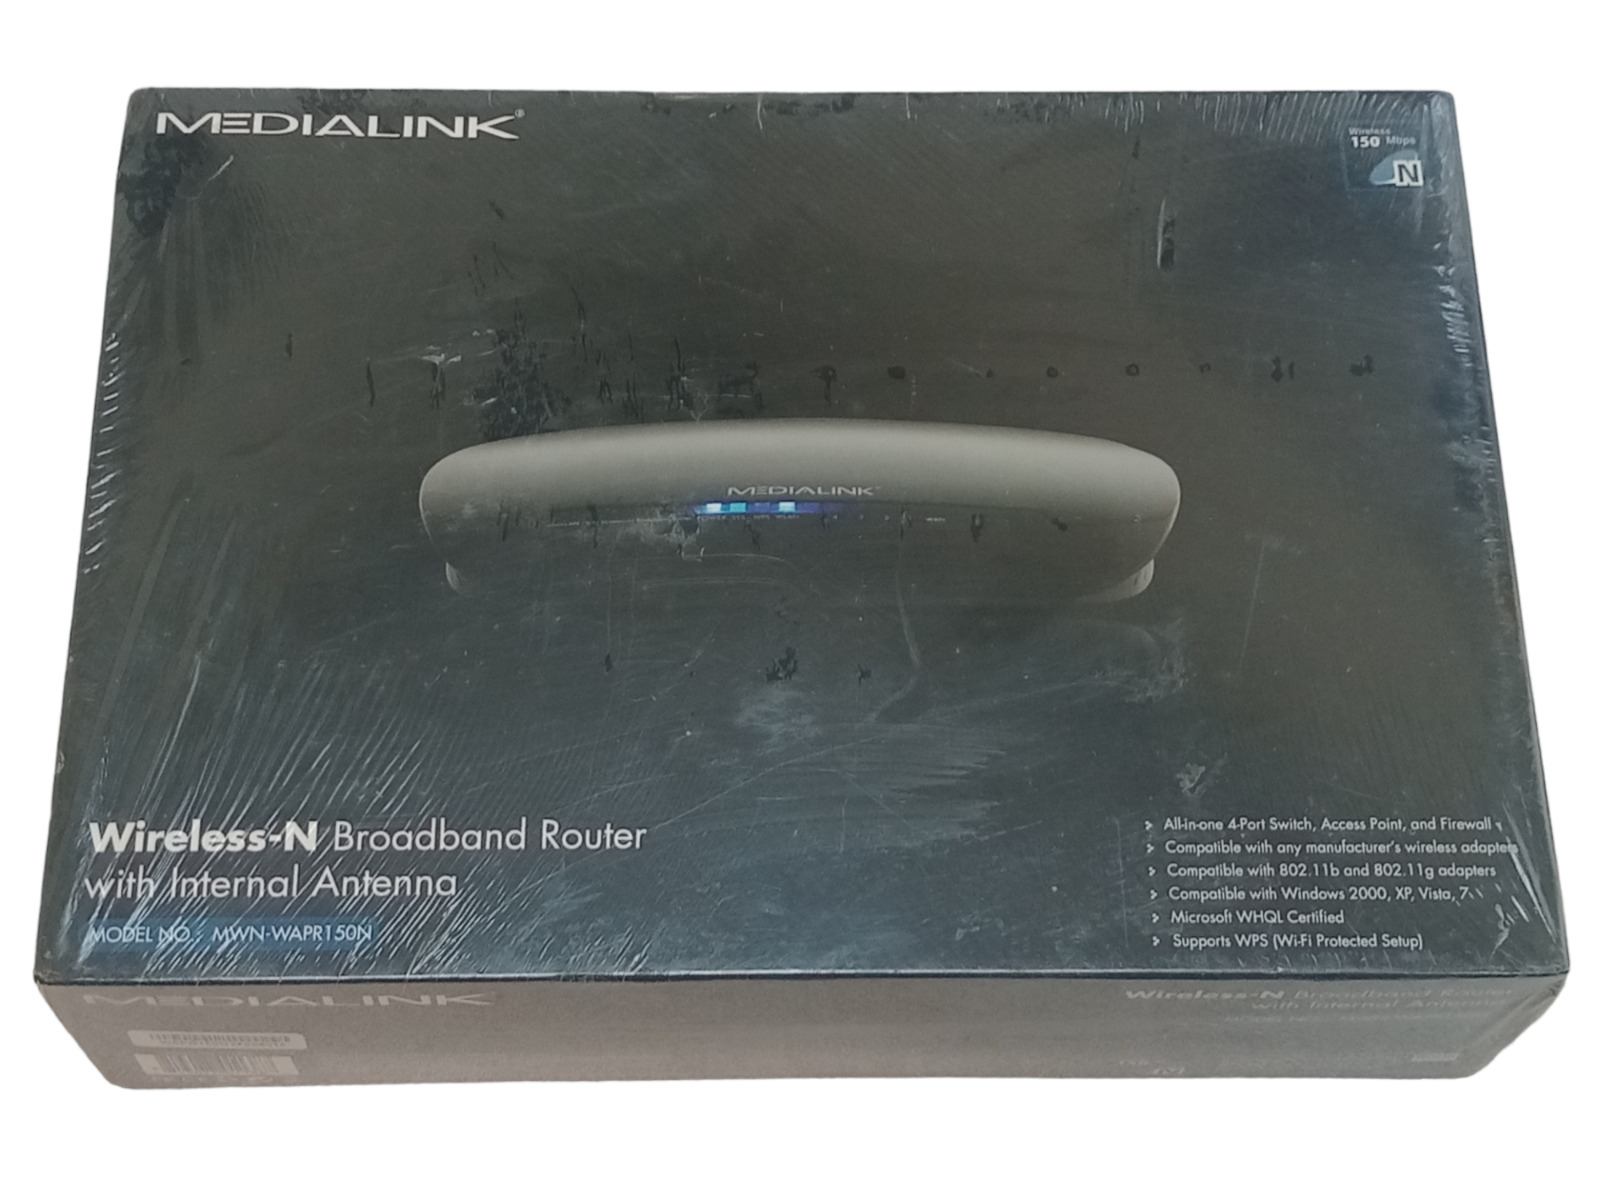 Medialink MWN-WAPR150N 150Mbps 4-Port 10/100 Wireless N Router | New/SiOP